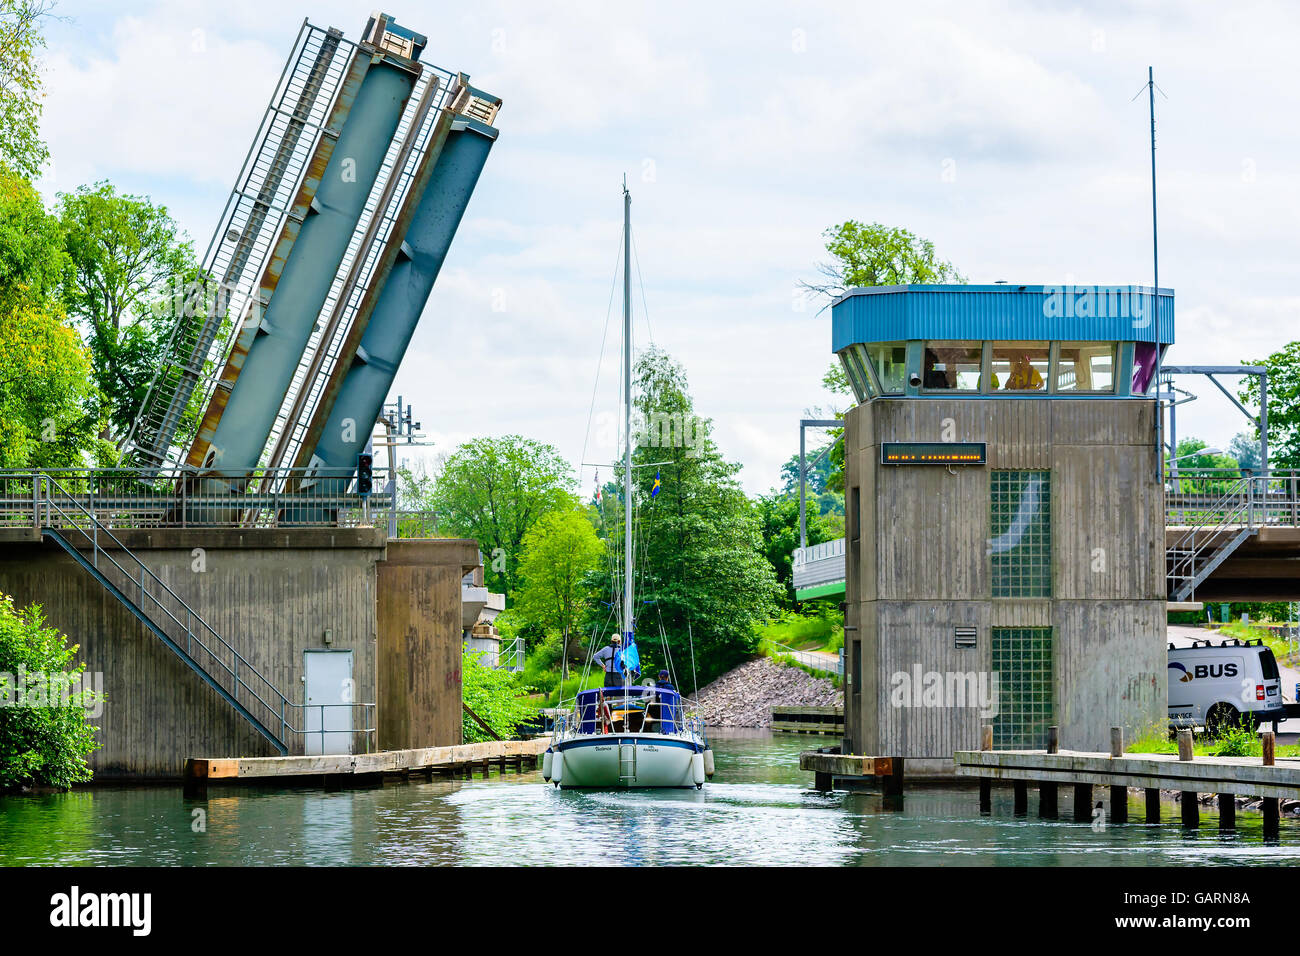 Motala, Sweden - June 21, 2016: Sailboat traveling under a movable bridge. People visible inside the control tower at the side o Stock Photo